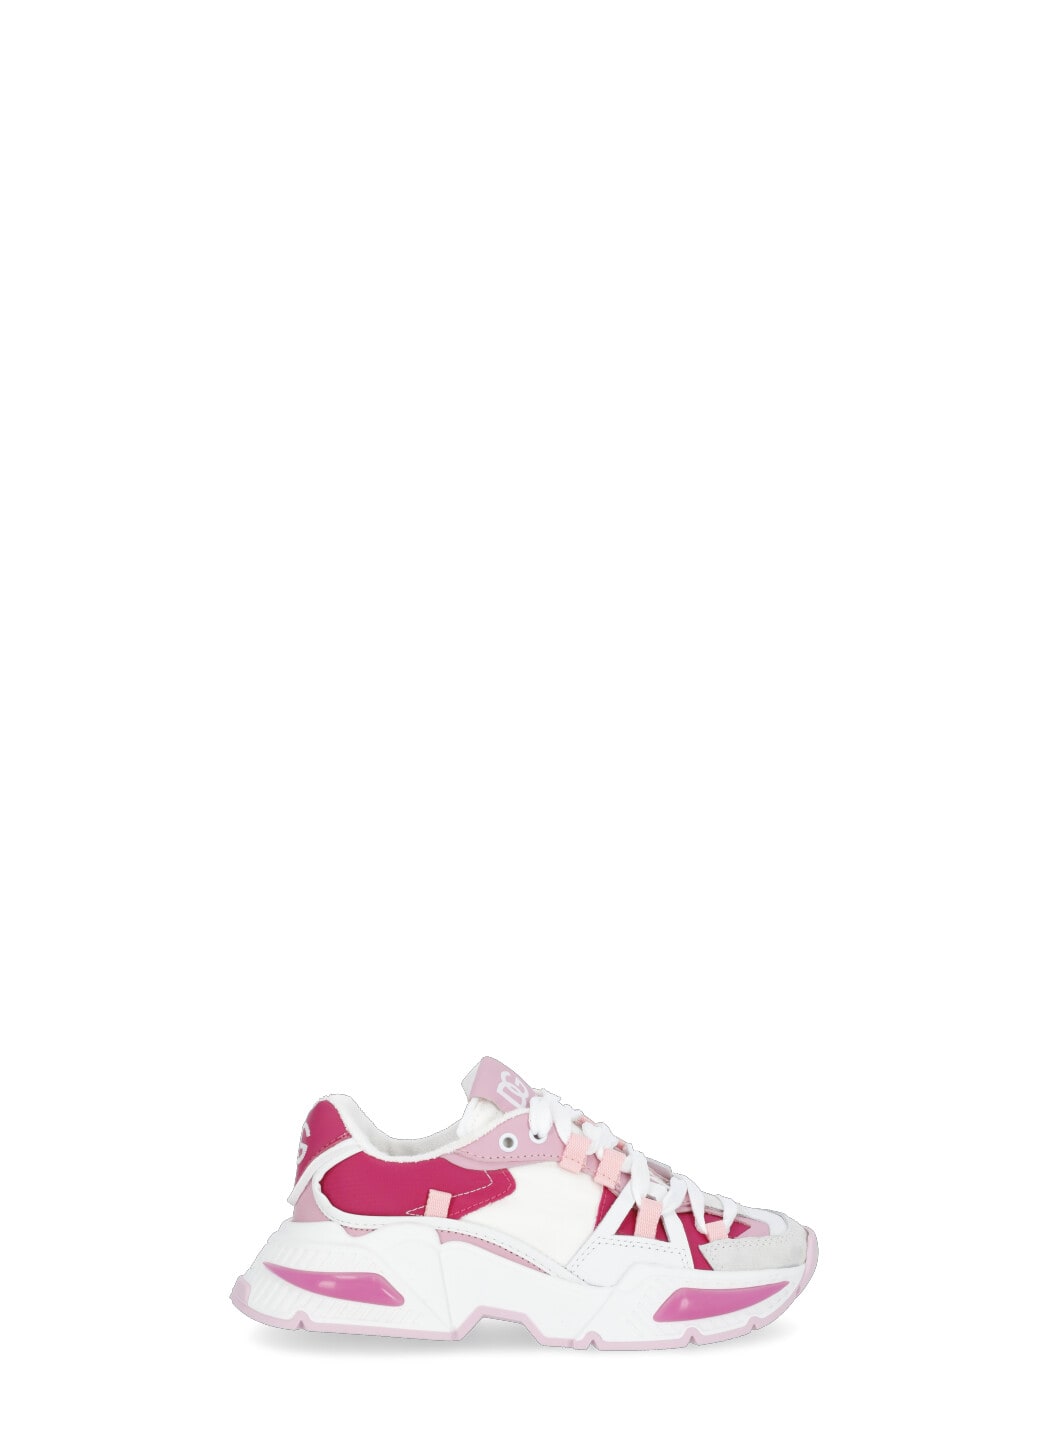 DOLCE & GABBANA AIRMASTER LOW SNEAKERS